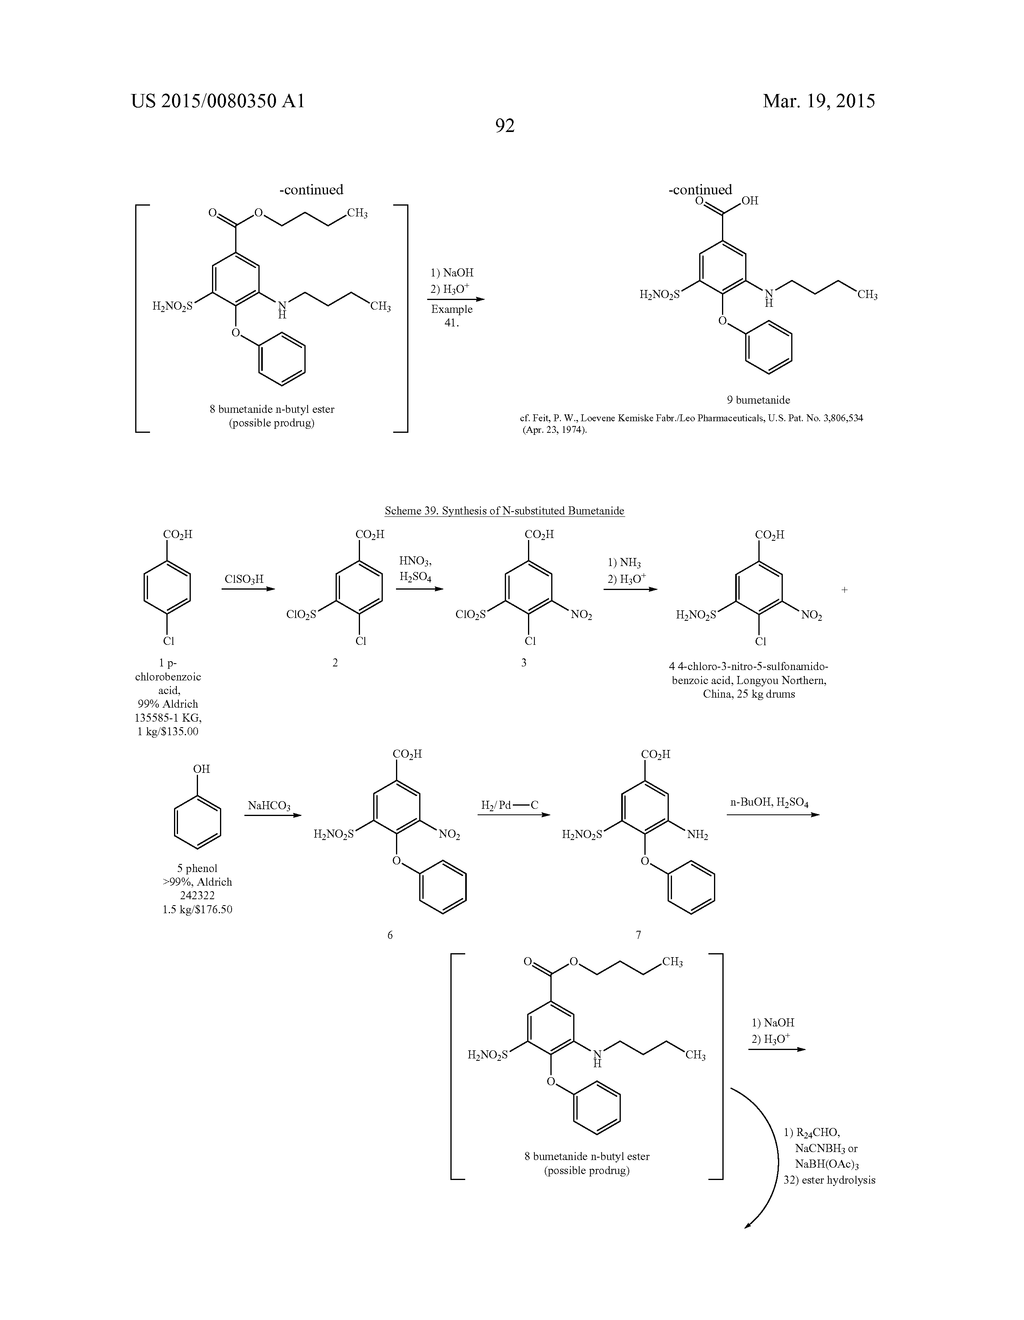 BUMETANIDE ANALOGS, COMPOSITIONS AND METHODS OF USE - diagram, schematic, and image 145